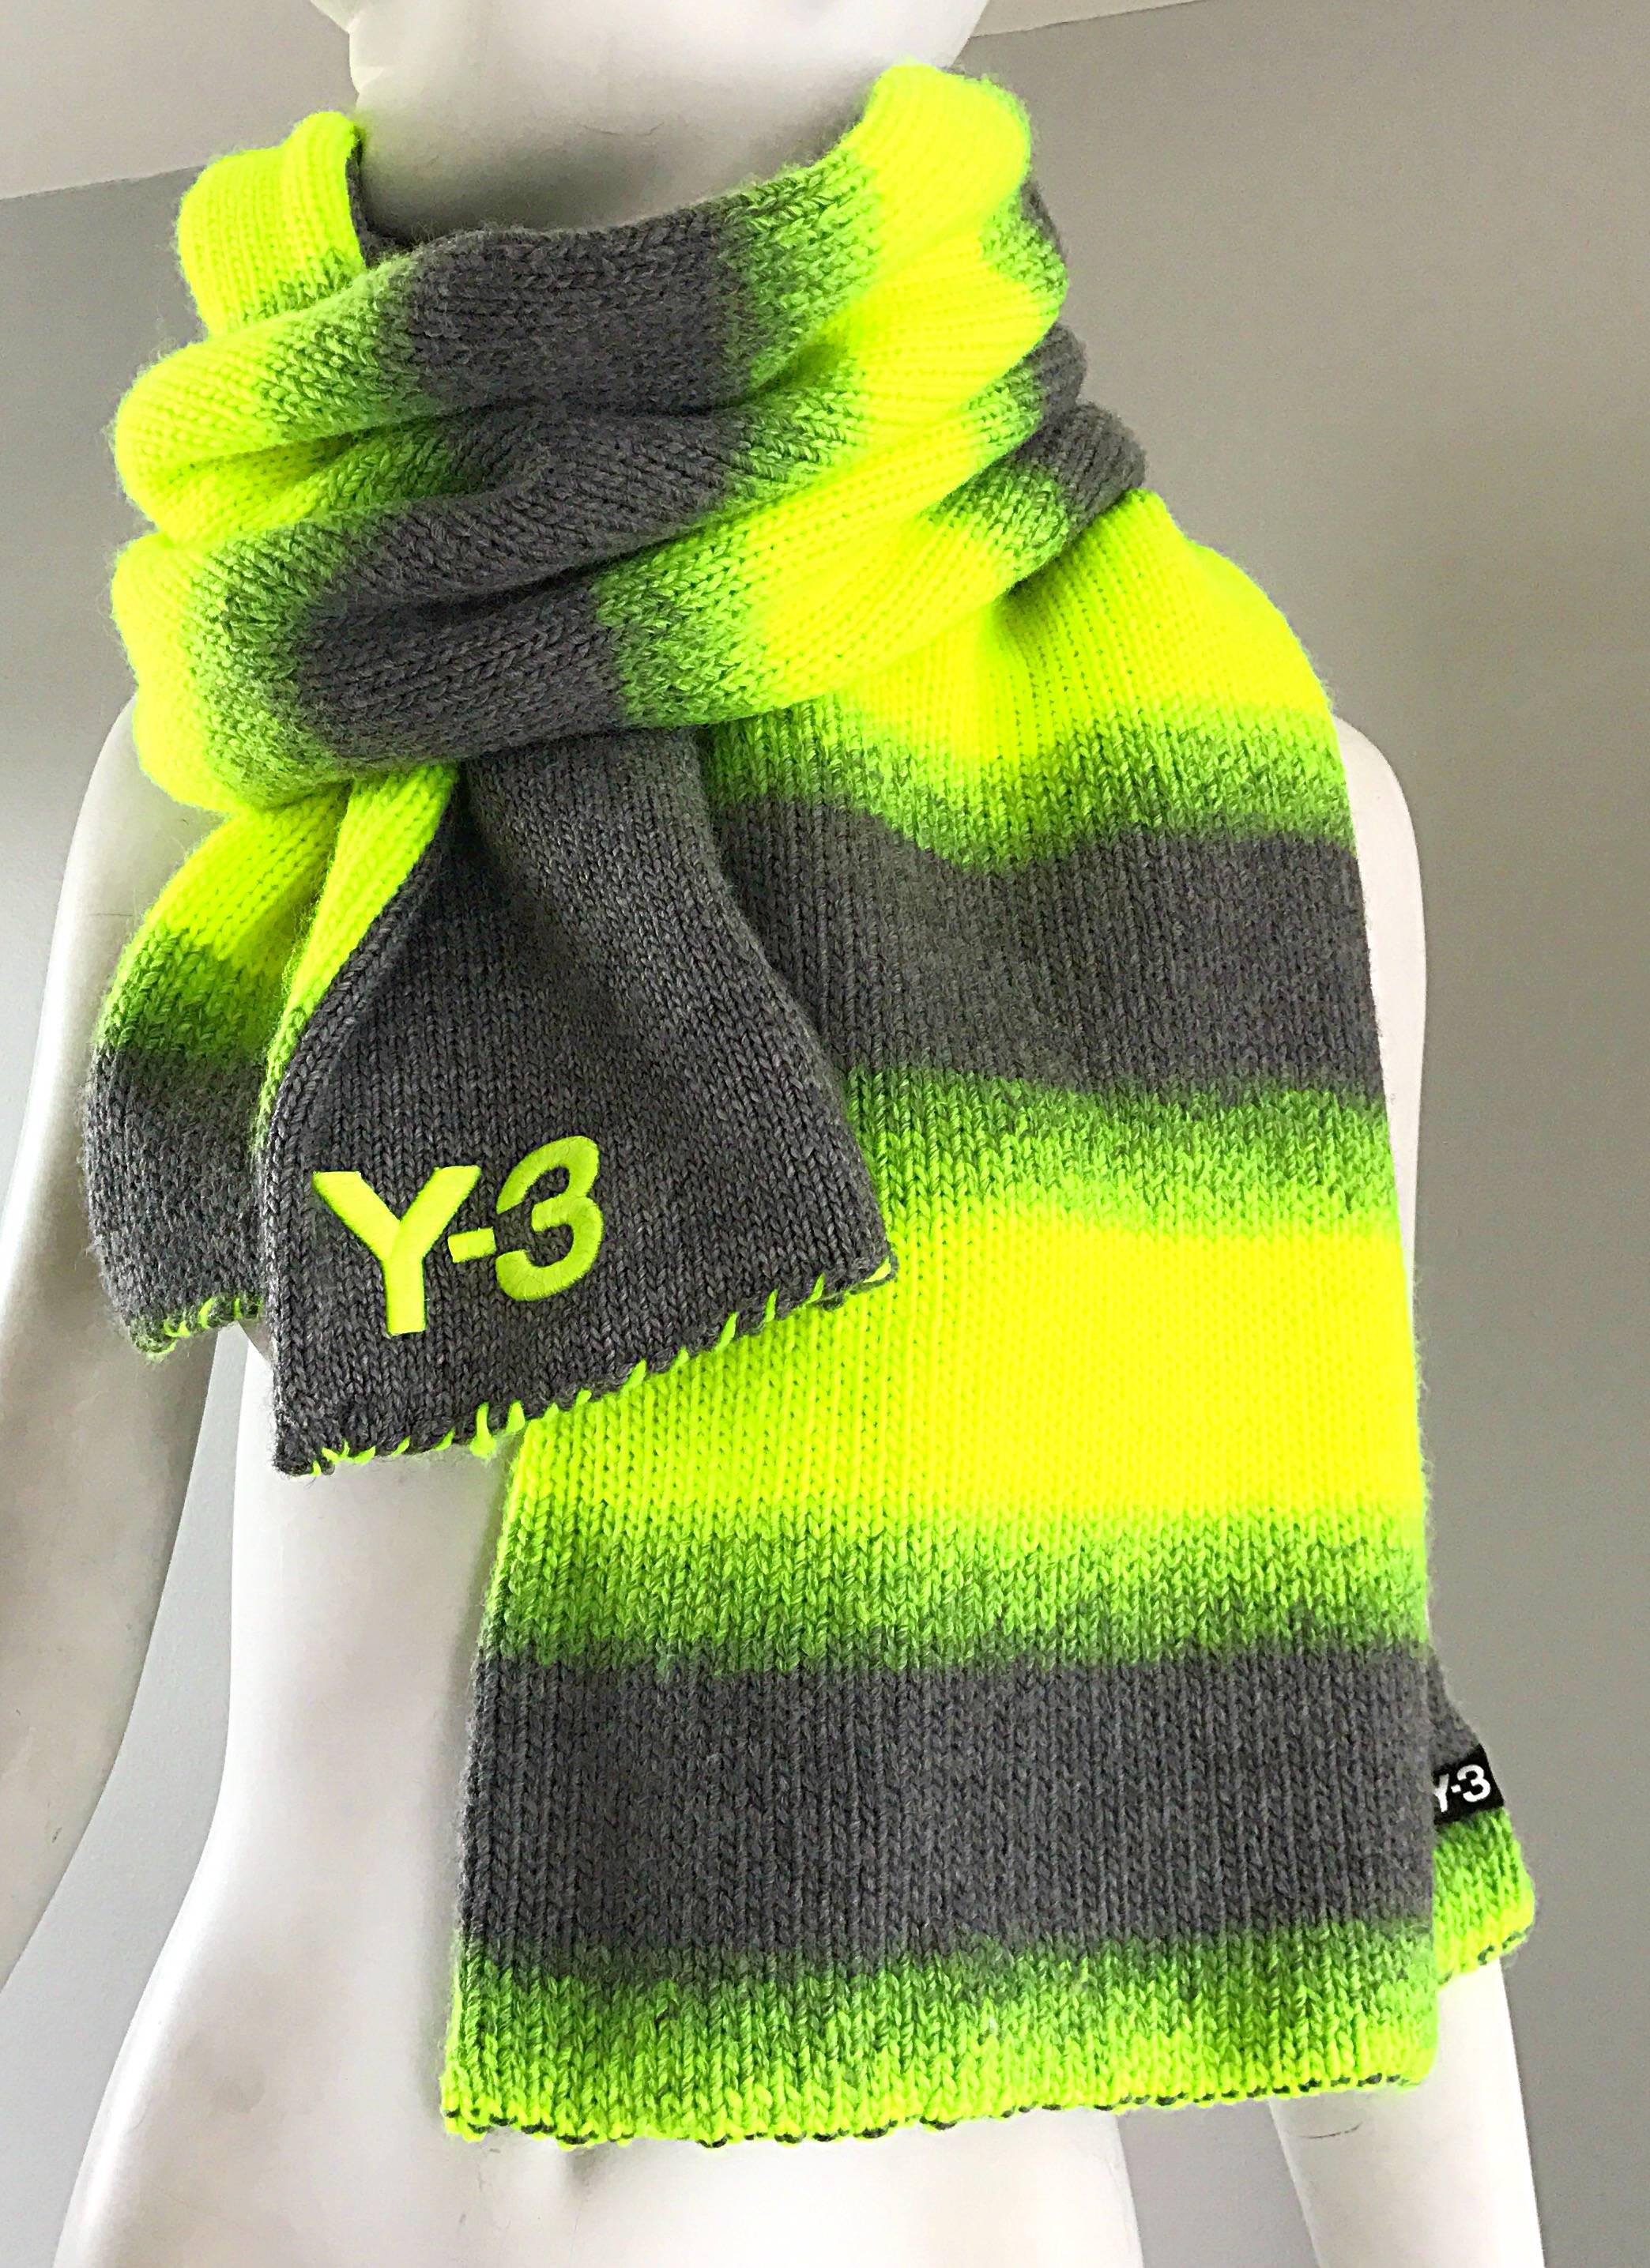 Unisex YHOJI YAMAMOTO Y-3 bright neon tennis ball yellow and gray oversize wool blend reversible scarf! One side features neon yellow and gray stripes, while the other side is a solid gray. Super soft wool and acrylic blend. 
The perfect everyday